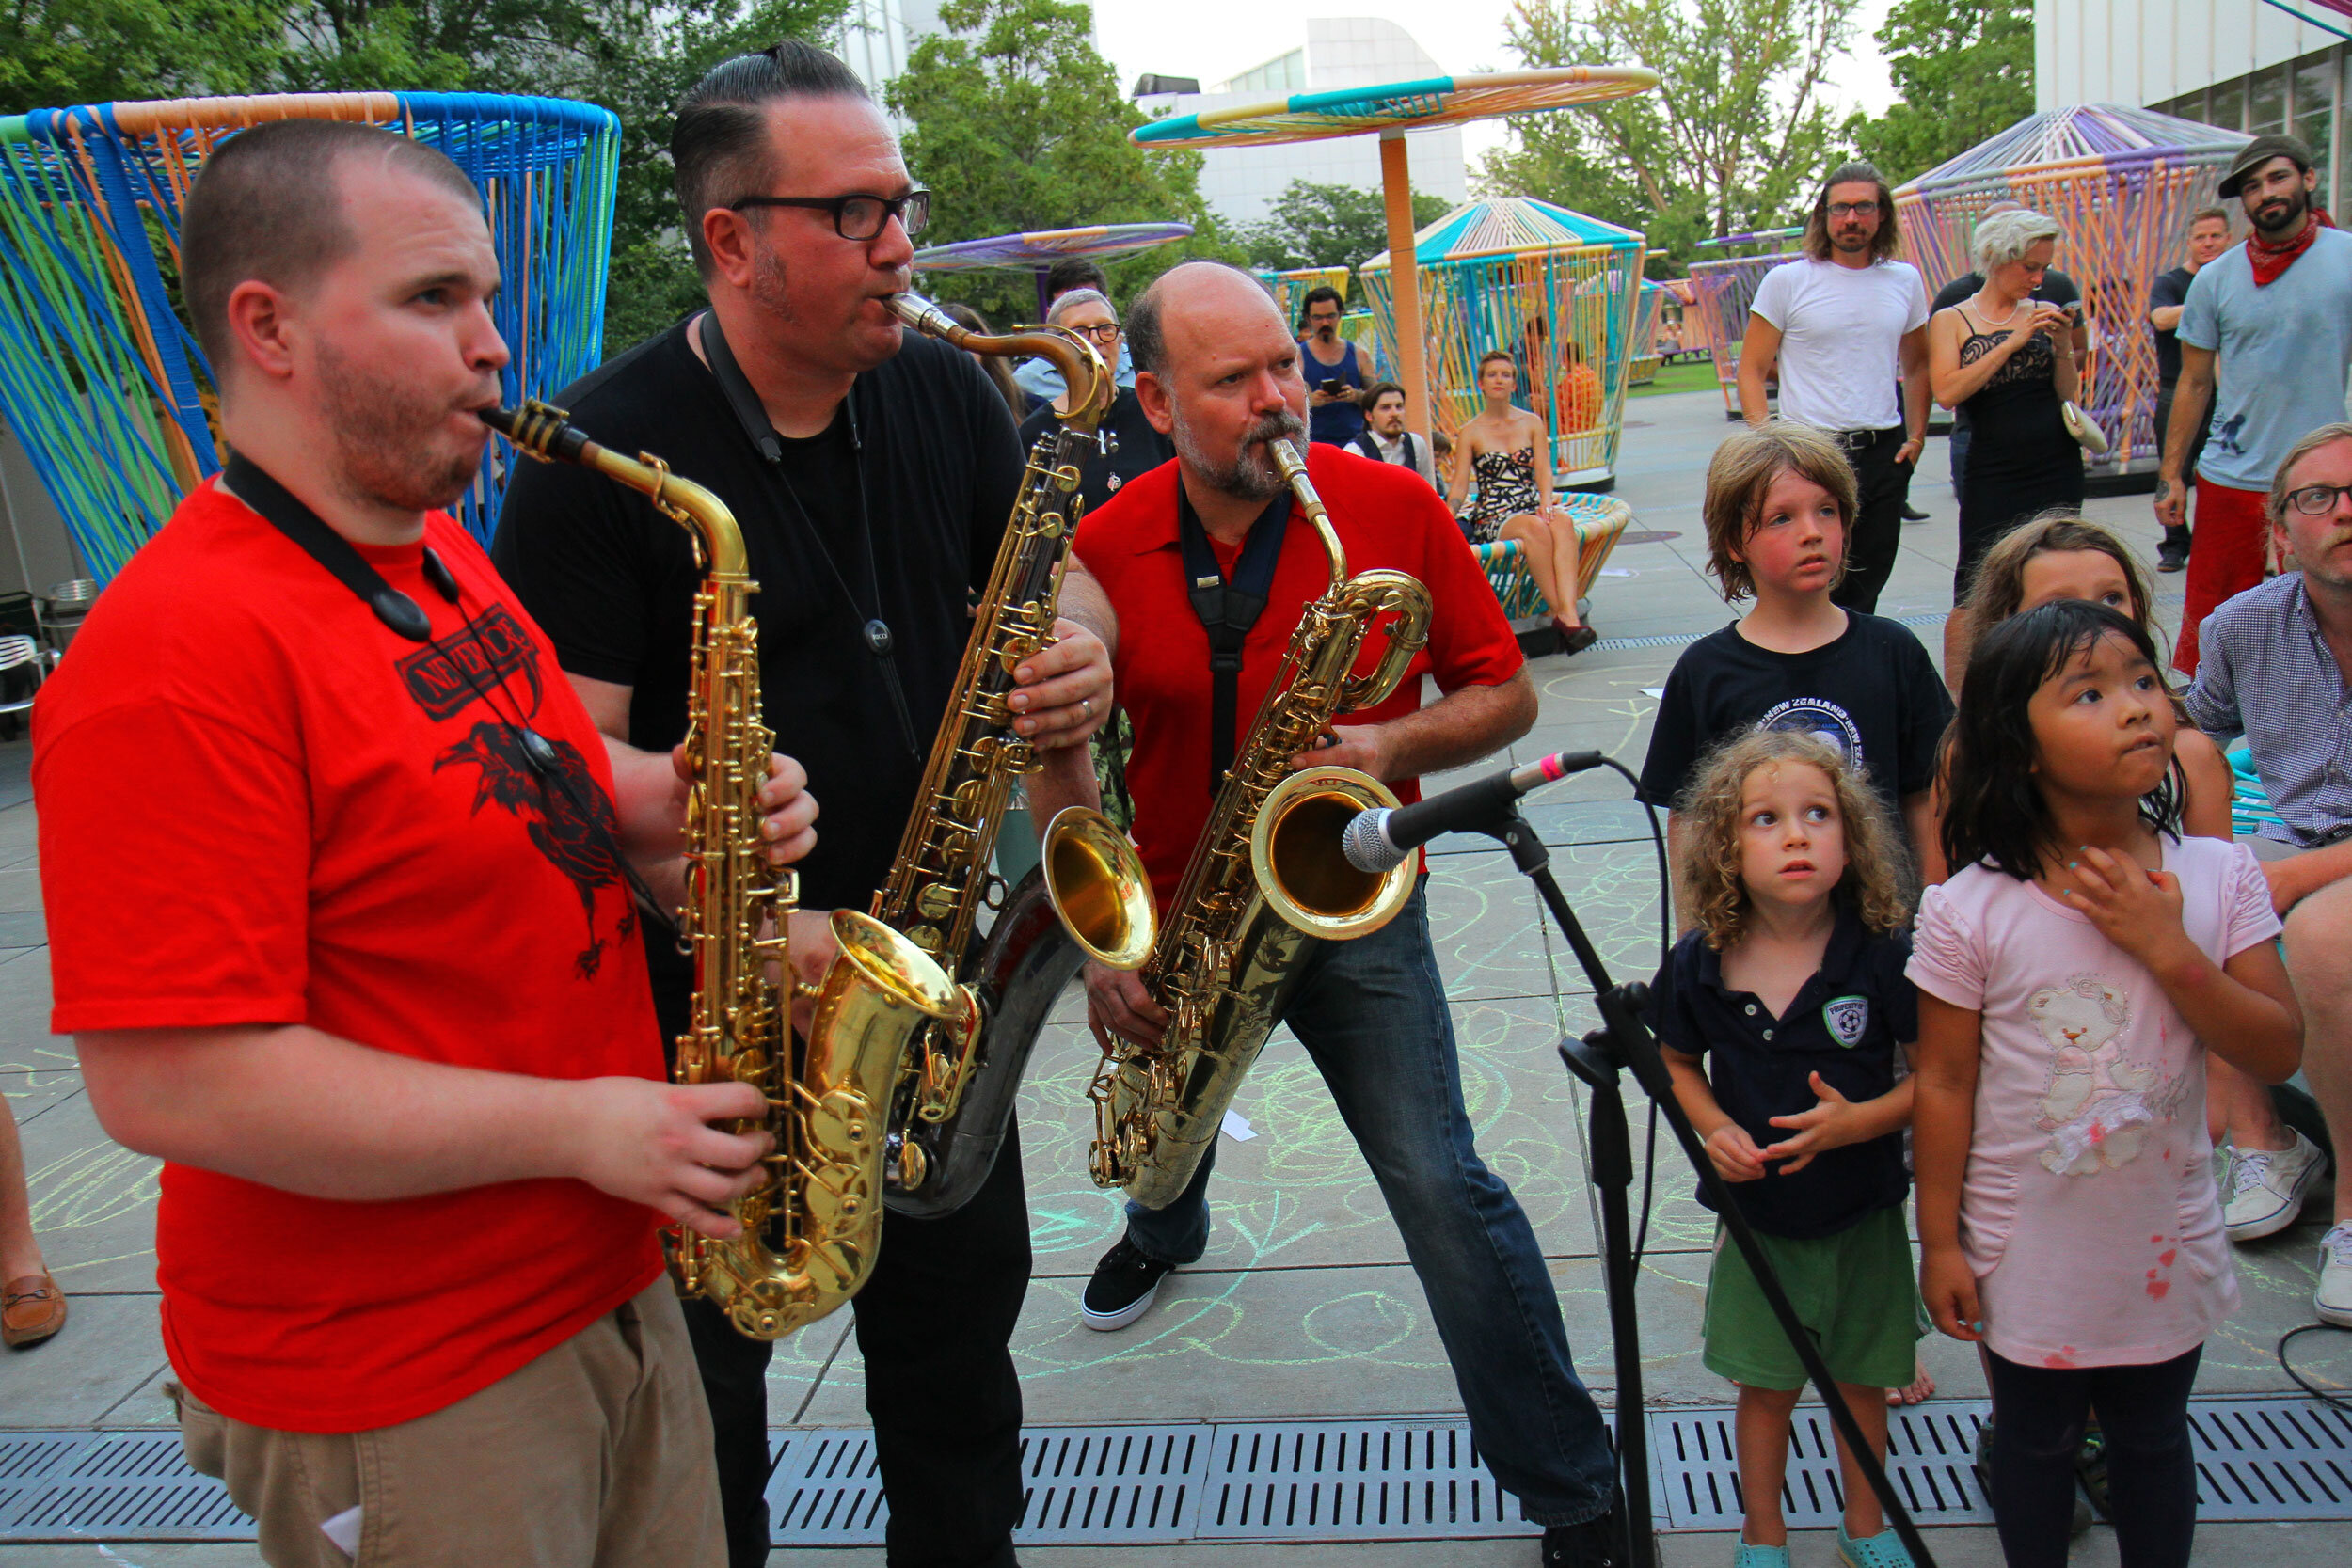 3 musicians with saxophones playing while a group of children watch intently.